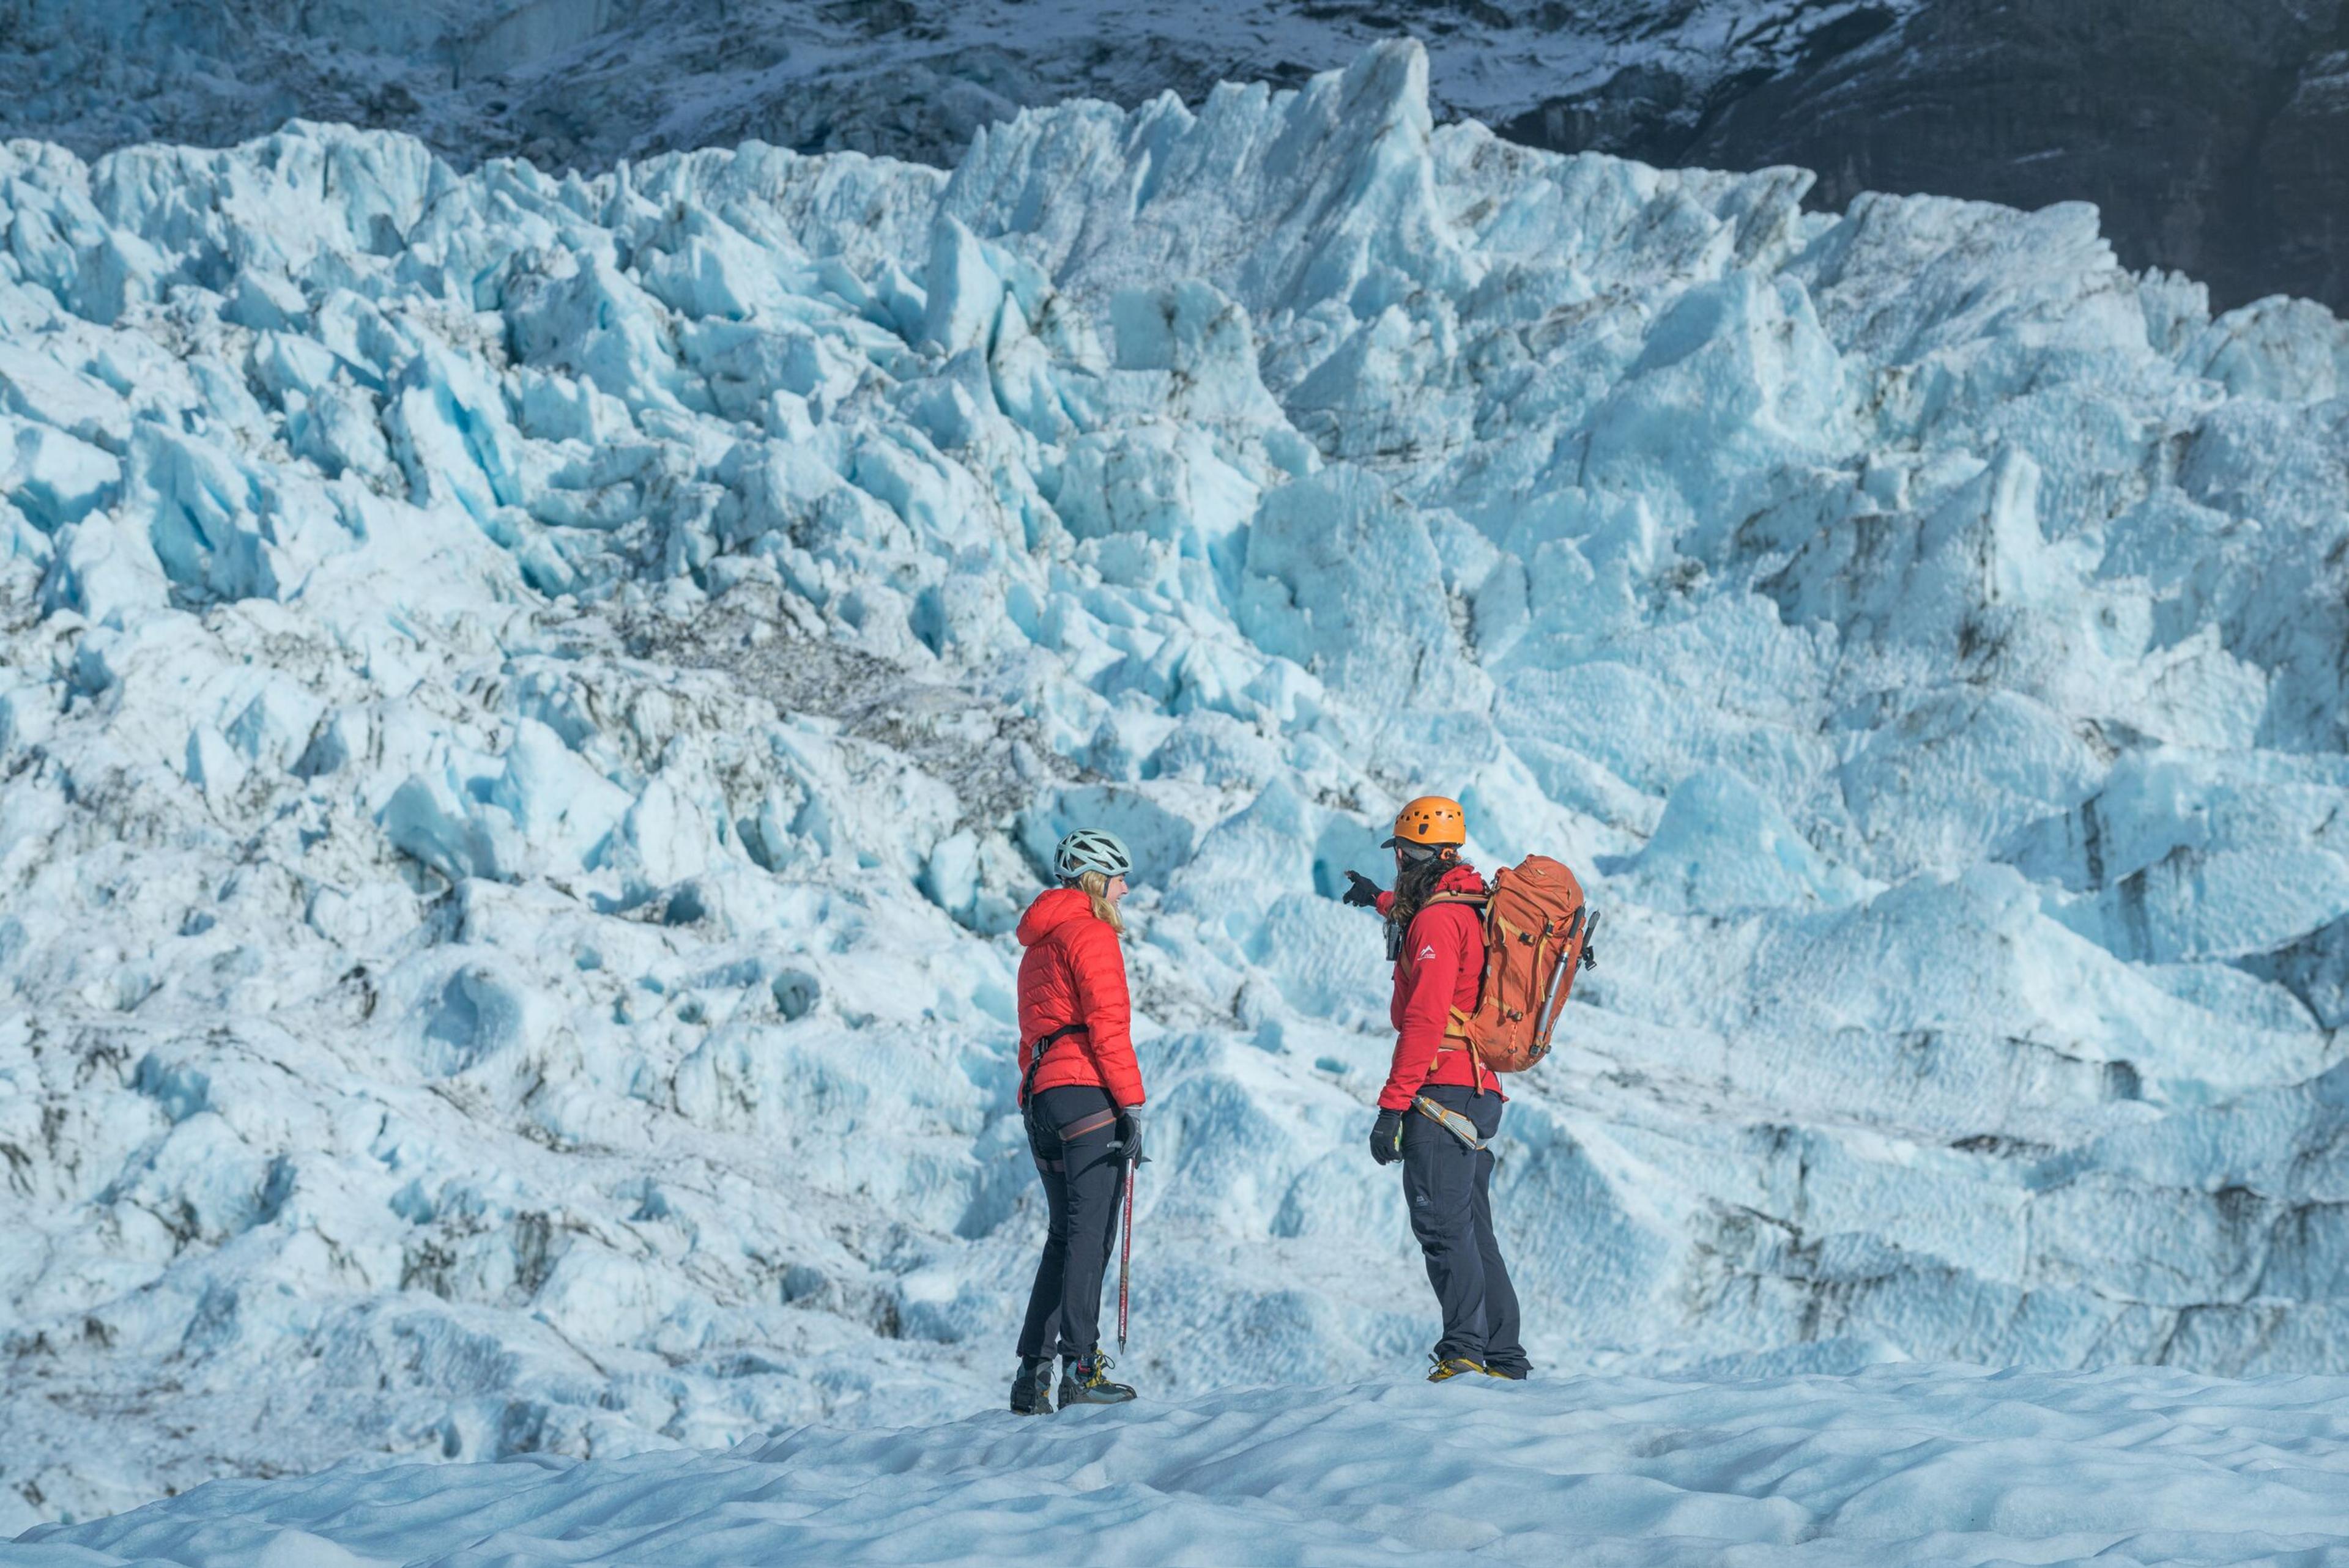 Two adventurers in vibrant red jackets and safety helmets stand atop a brilliant blue glacier, with jagged ice formations providing a dramatic backdrop.